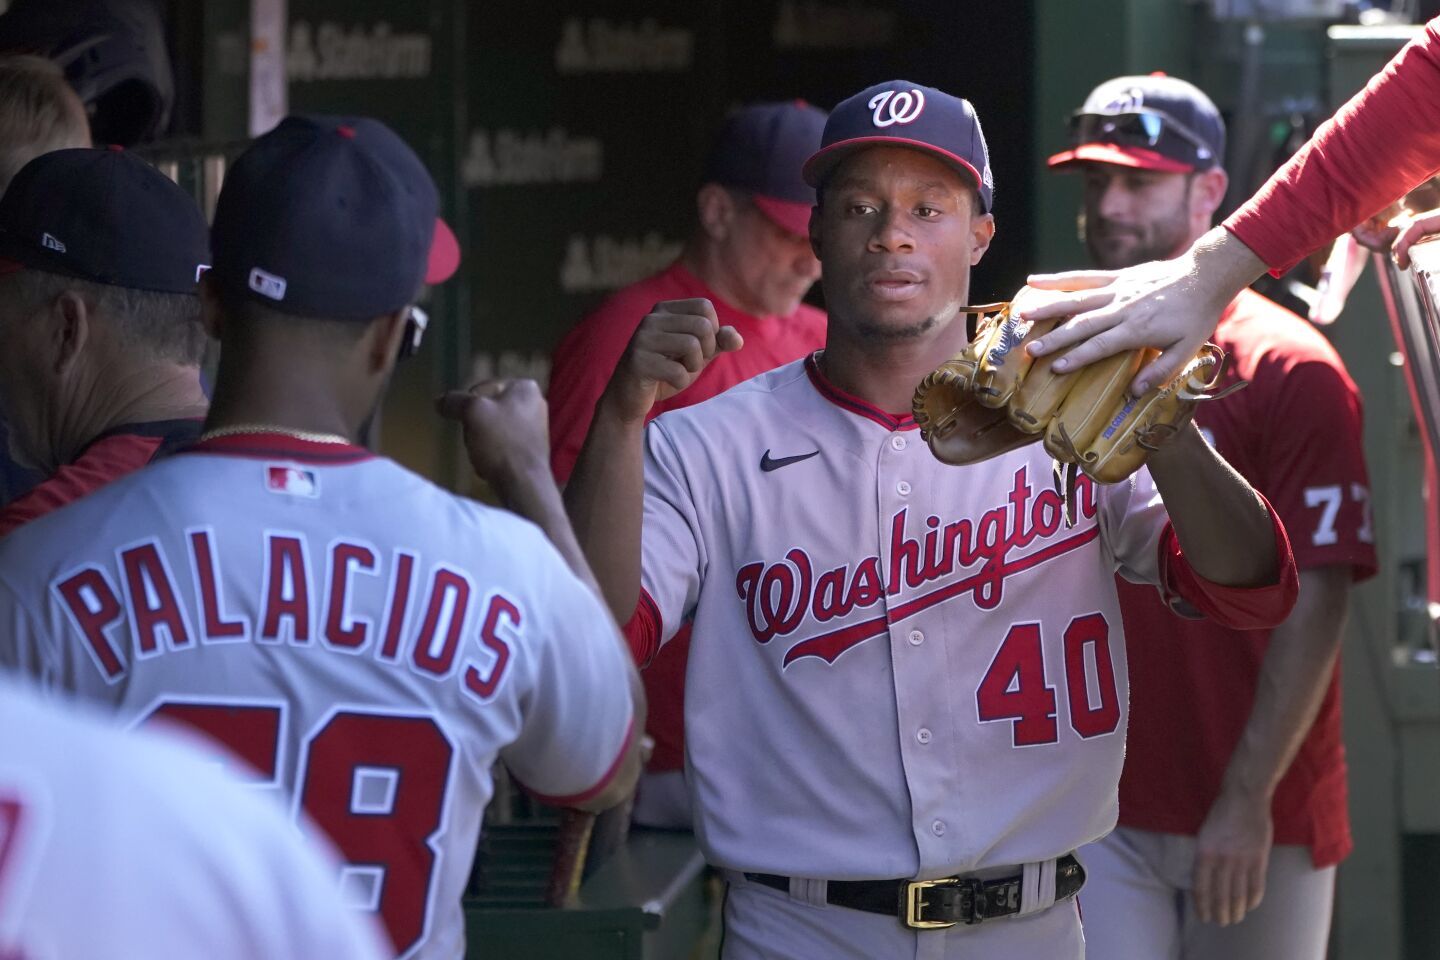 Washington Nationals (37-76, 5th in NL East)The Nationals went 11-16 in June, 6-19 in July and have lost eight of 10 to start August to claim the majors’ worst record. Their minus-200 run differential is also the worst in the majors, 46 runs off the next-worst team (Pirates).